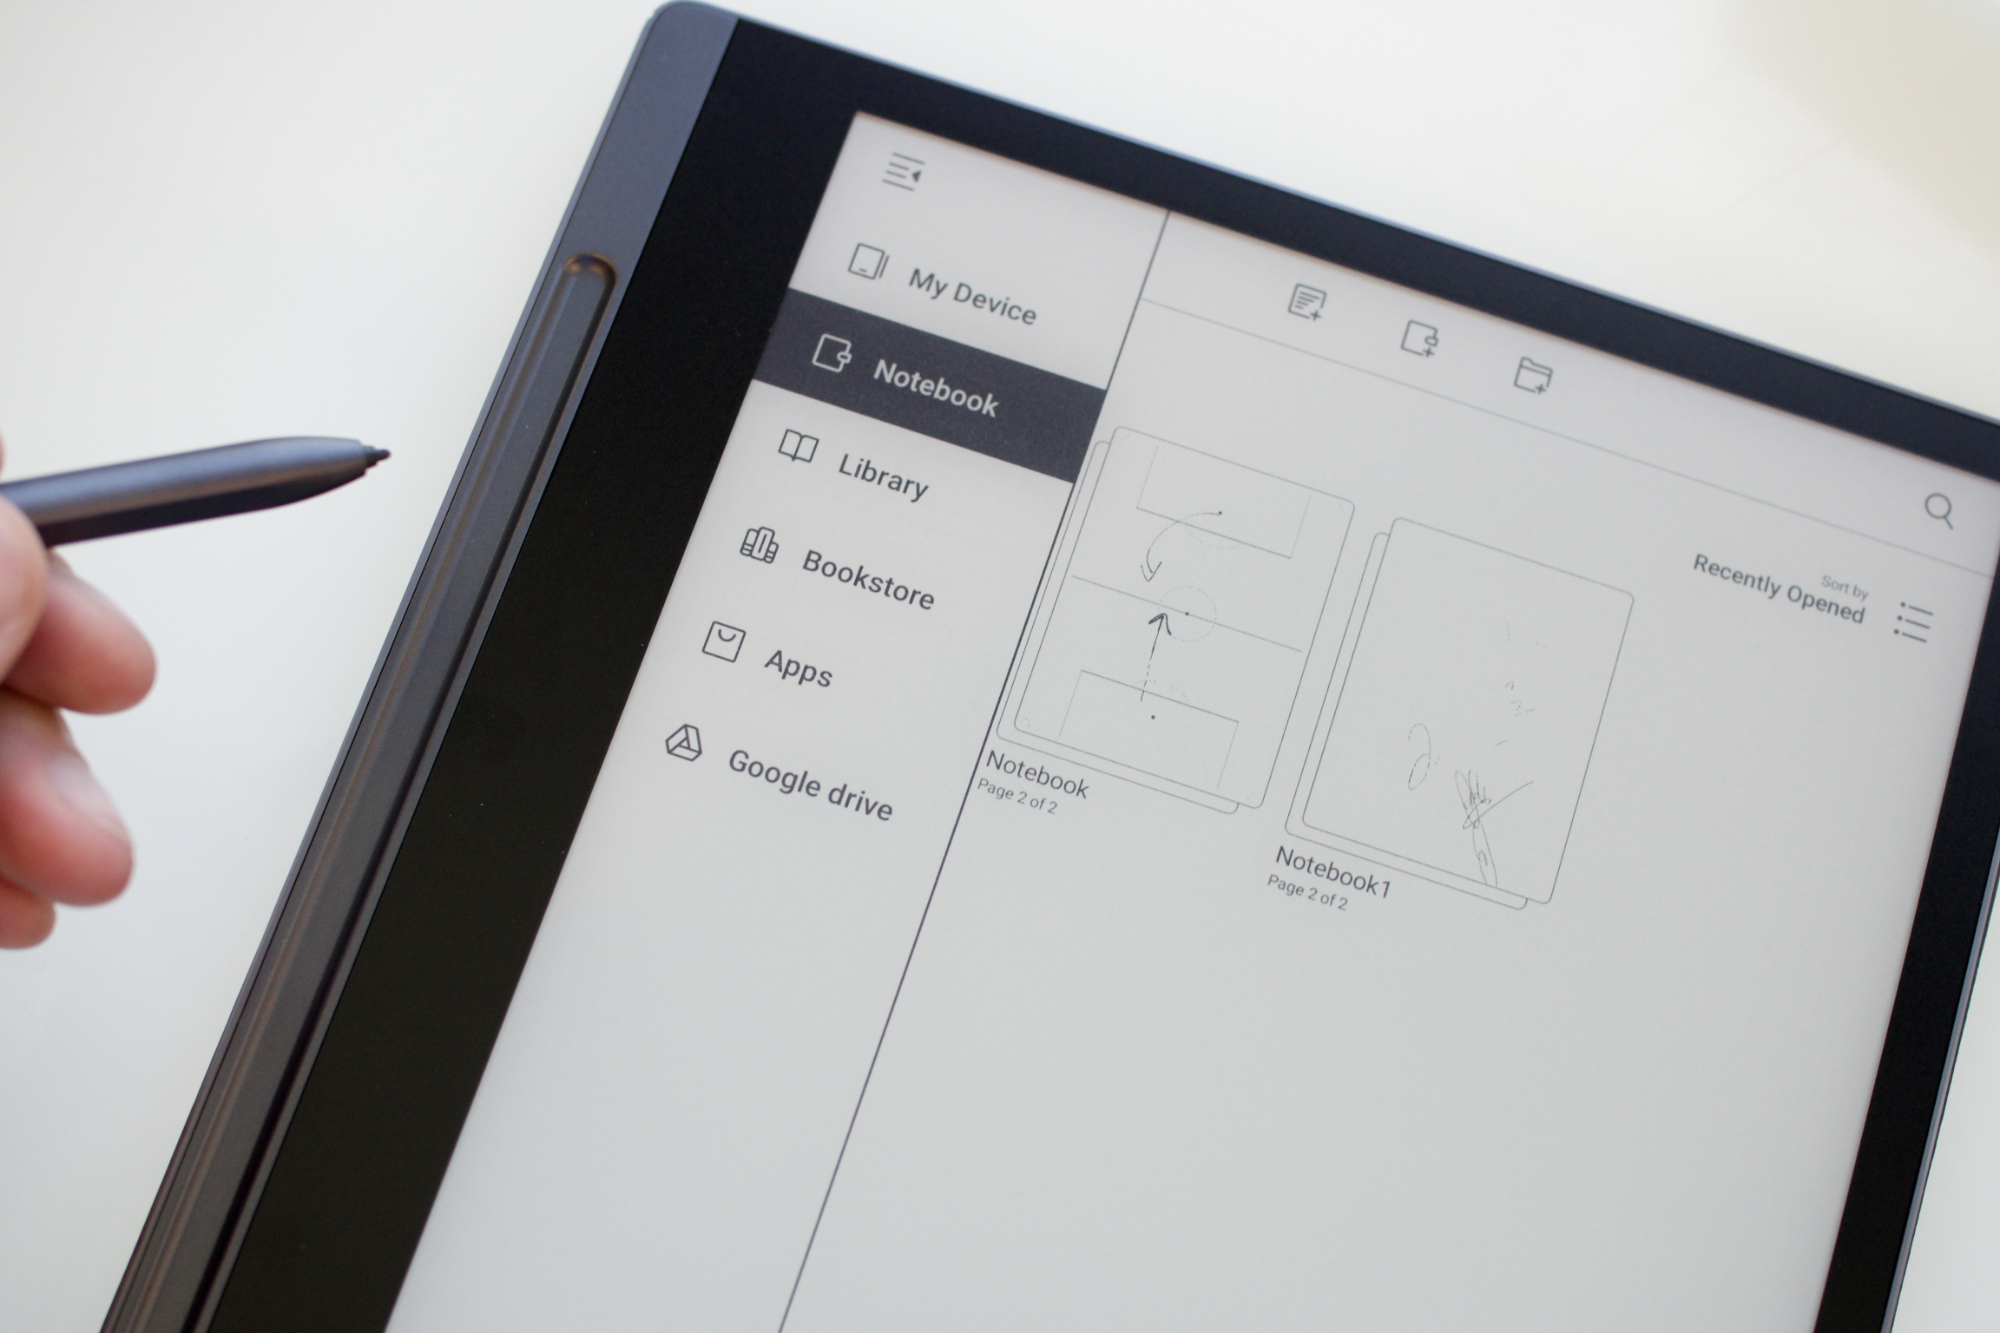 Should You Buy a Remarkable Tablet Version 1?, by Vy Tri Truong